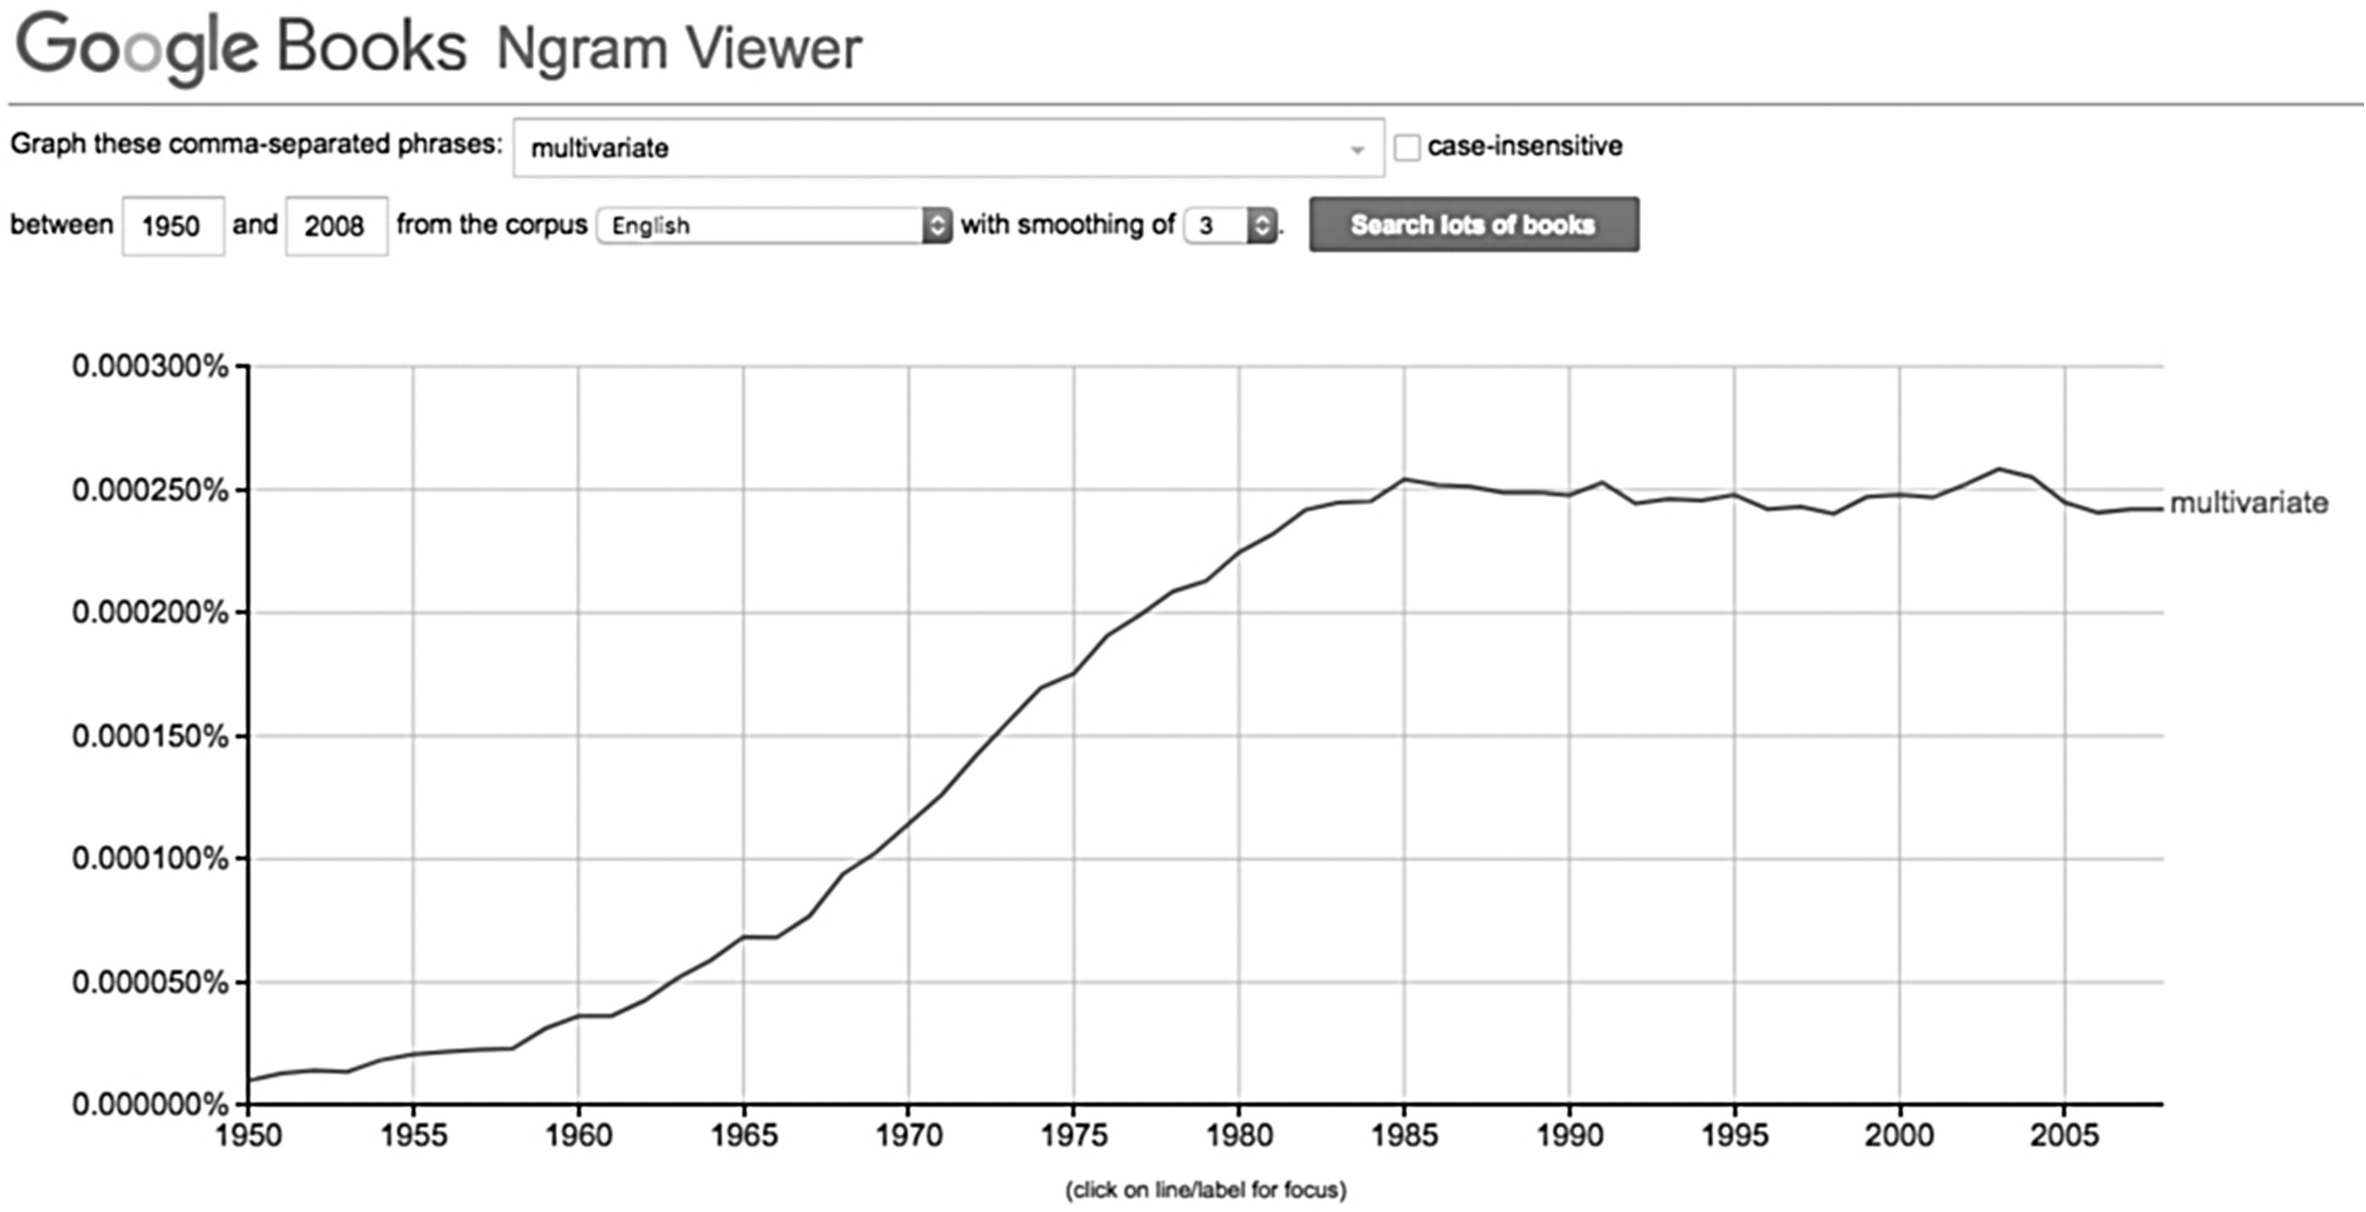 Key Cleaning Steps Before Generating Ngrams